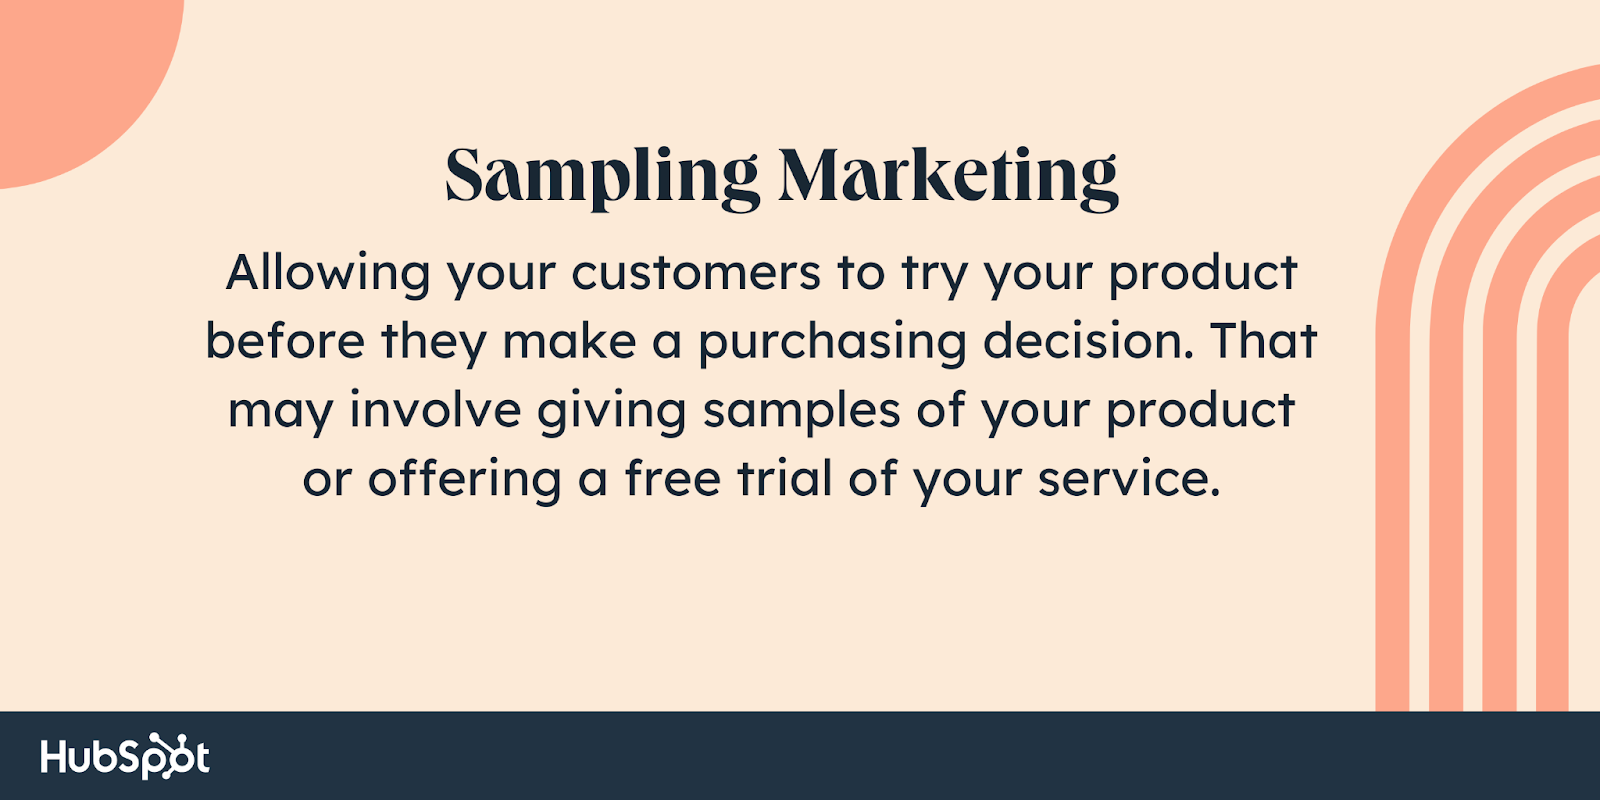 Sampling Marketing.  Allowing your customers to try your product before making a purchase decision.  This could include giving away samples of your product or a free trial of your service.